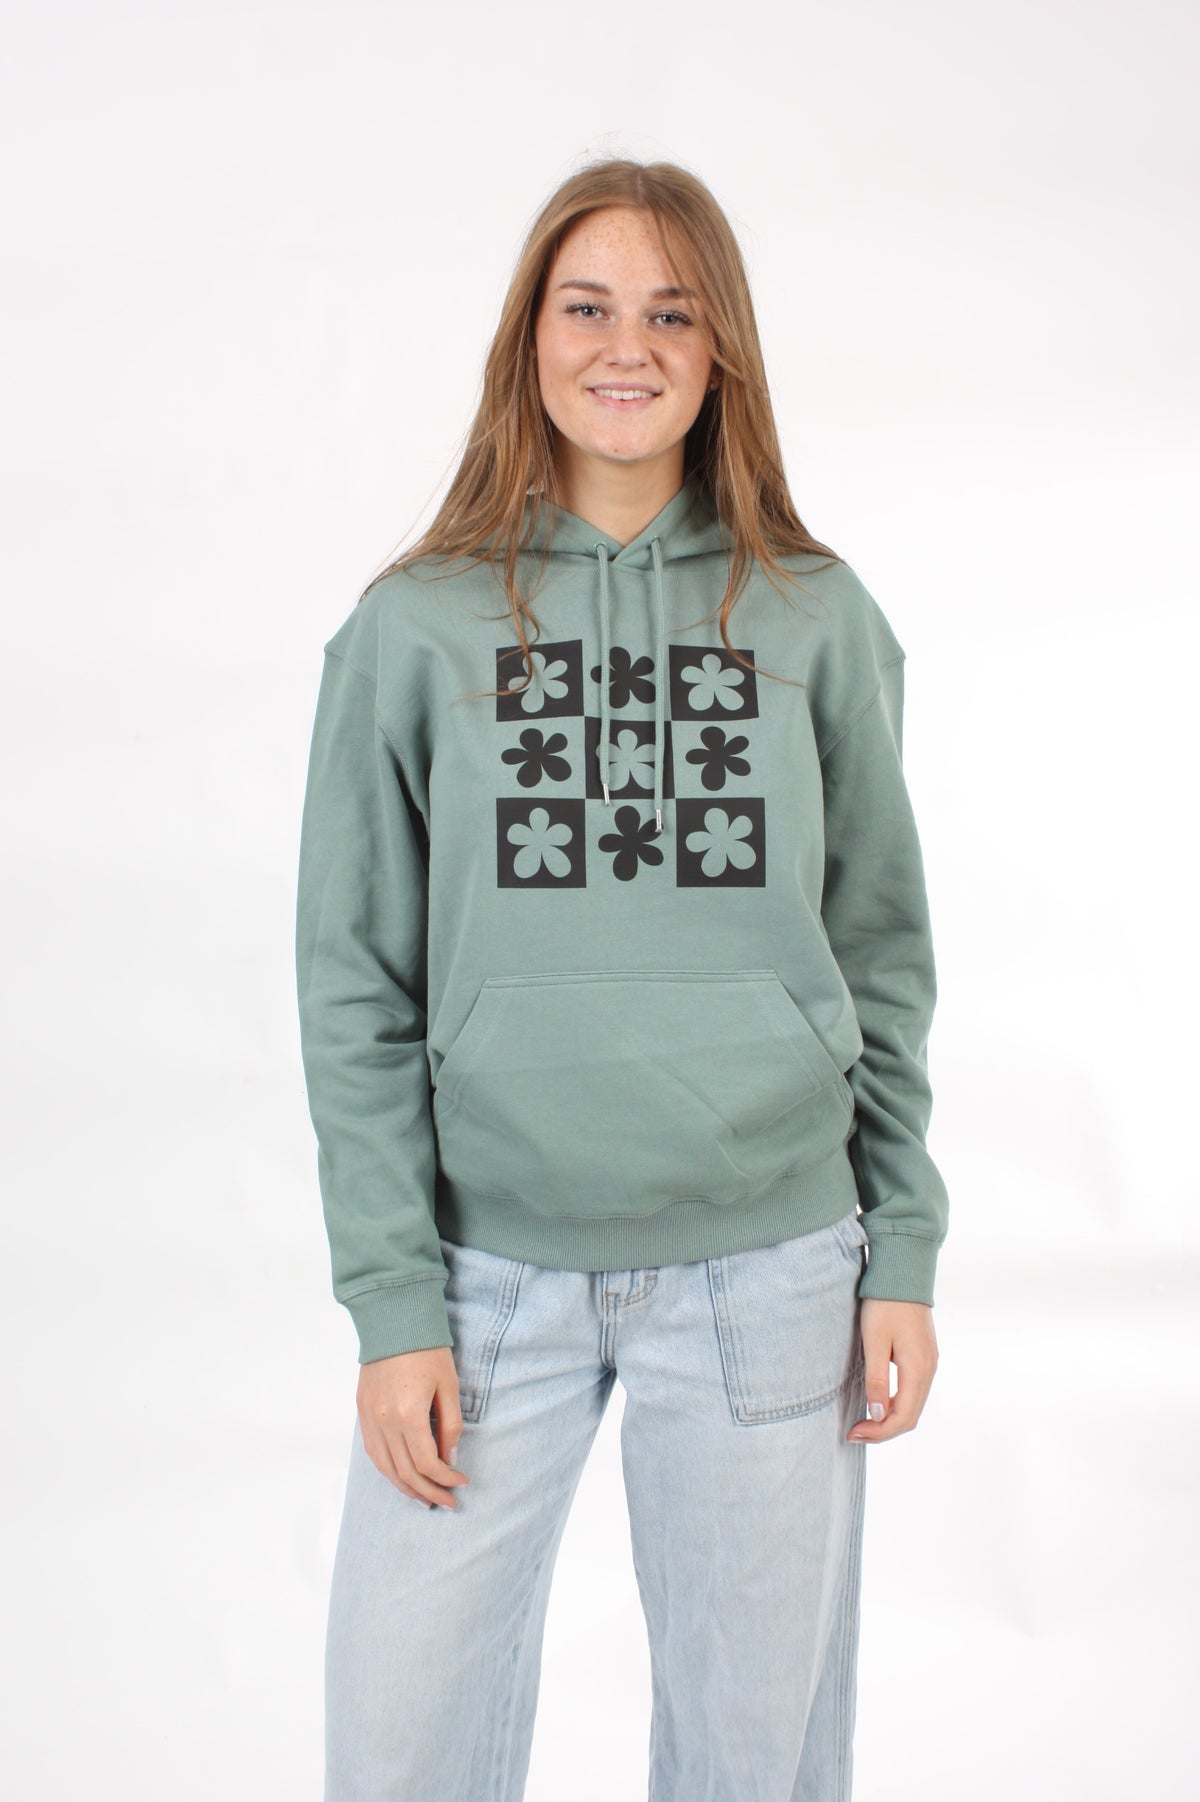 Hoody - Sage with Checked Daisy's print - Pre-Order